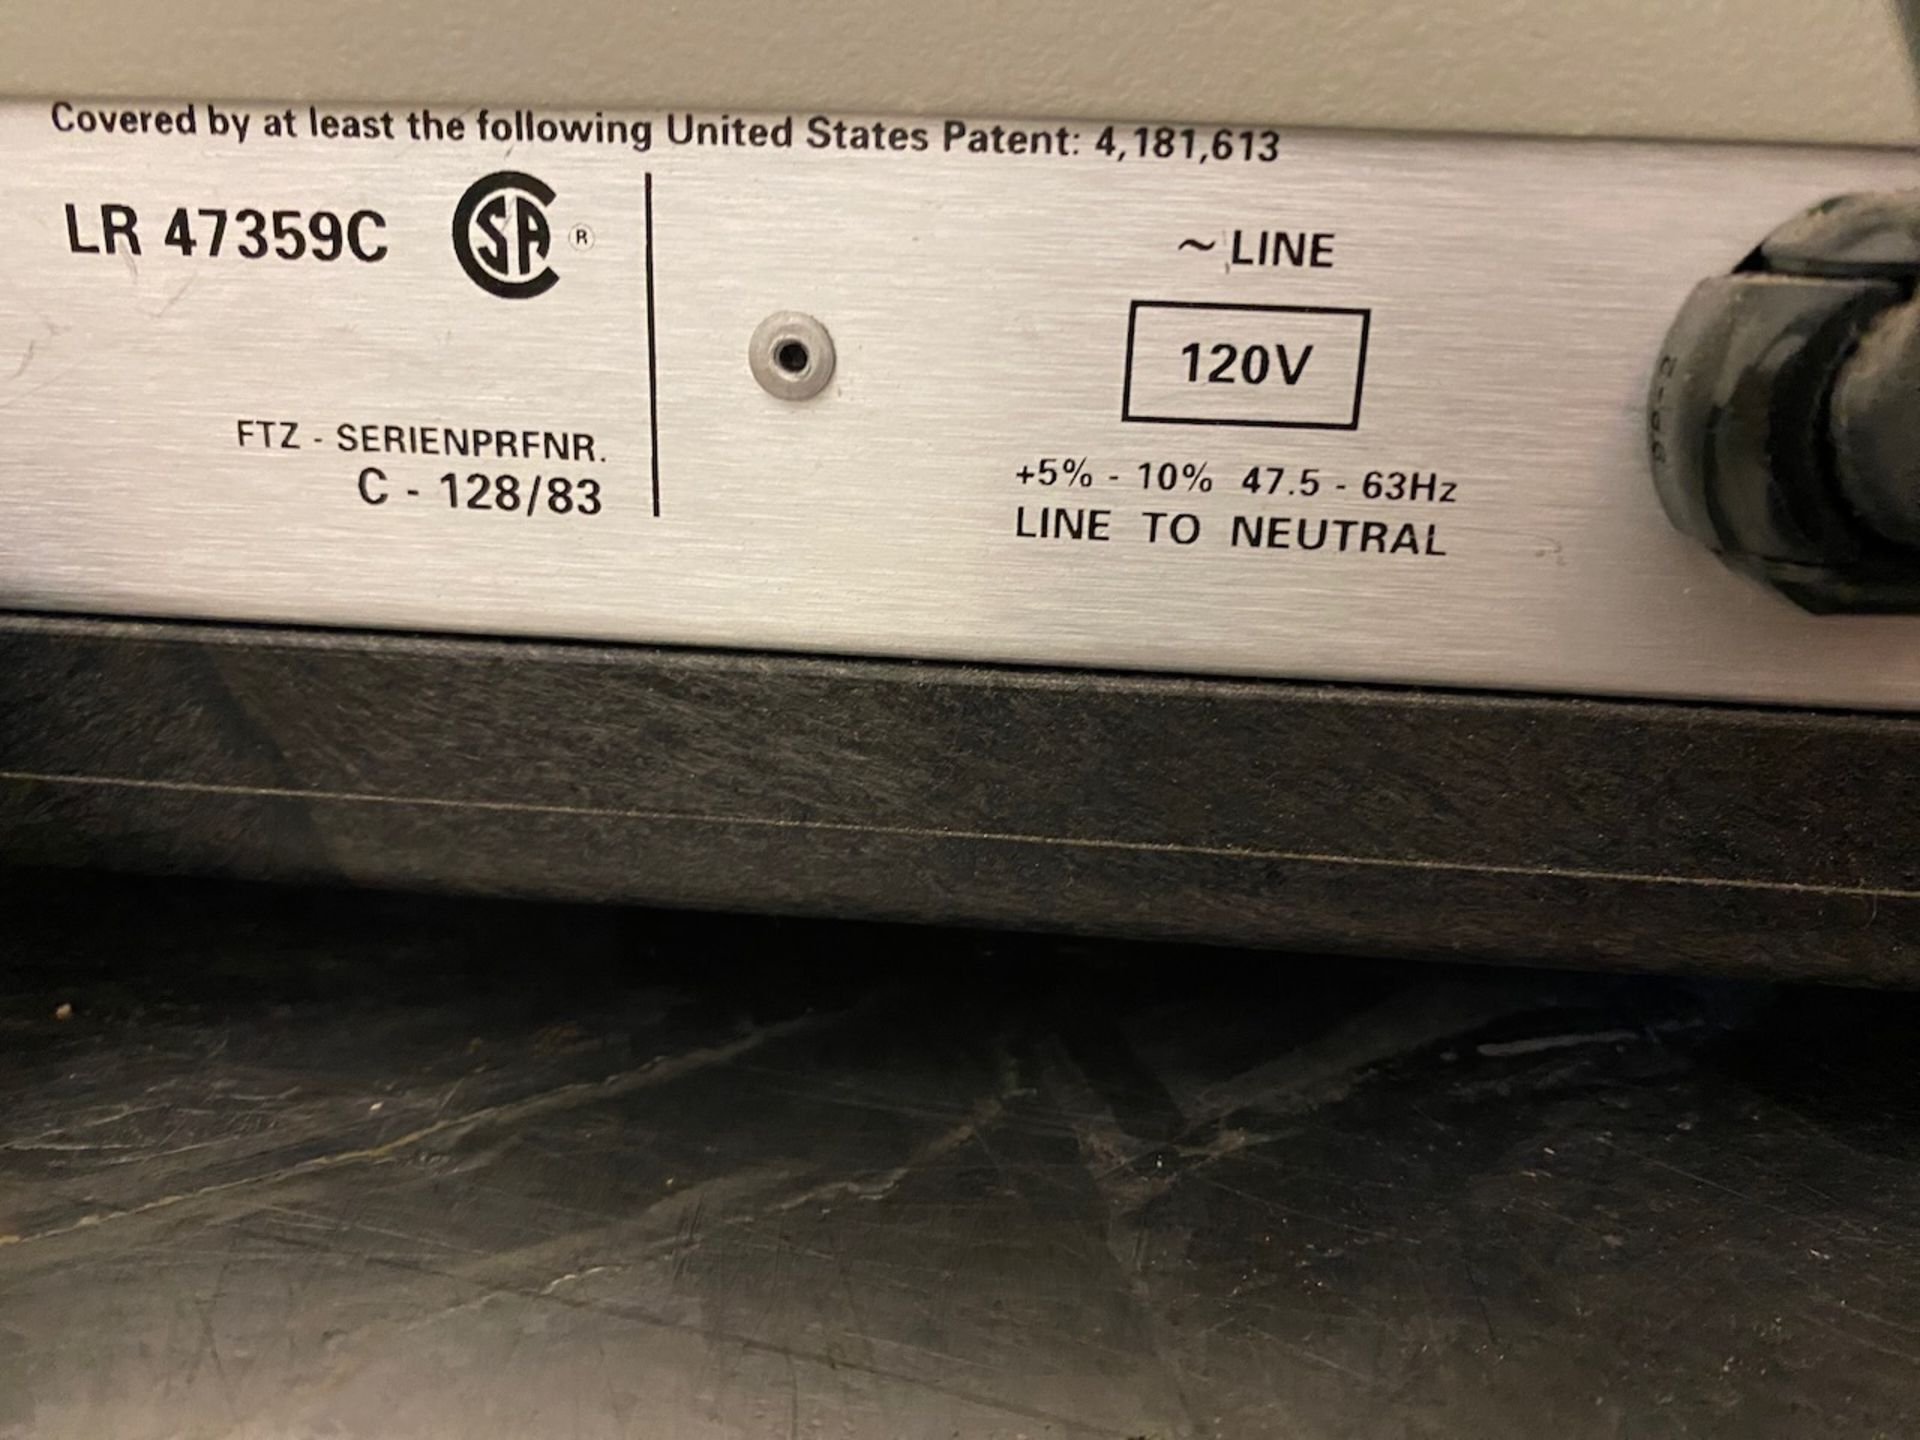 Hewlett Packard 5890 Series 2 Plus Gas chromatograph. {TAG:1190167} - Image 7 of 8